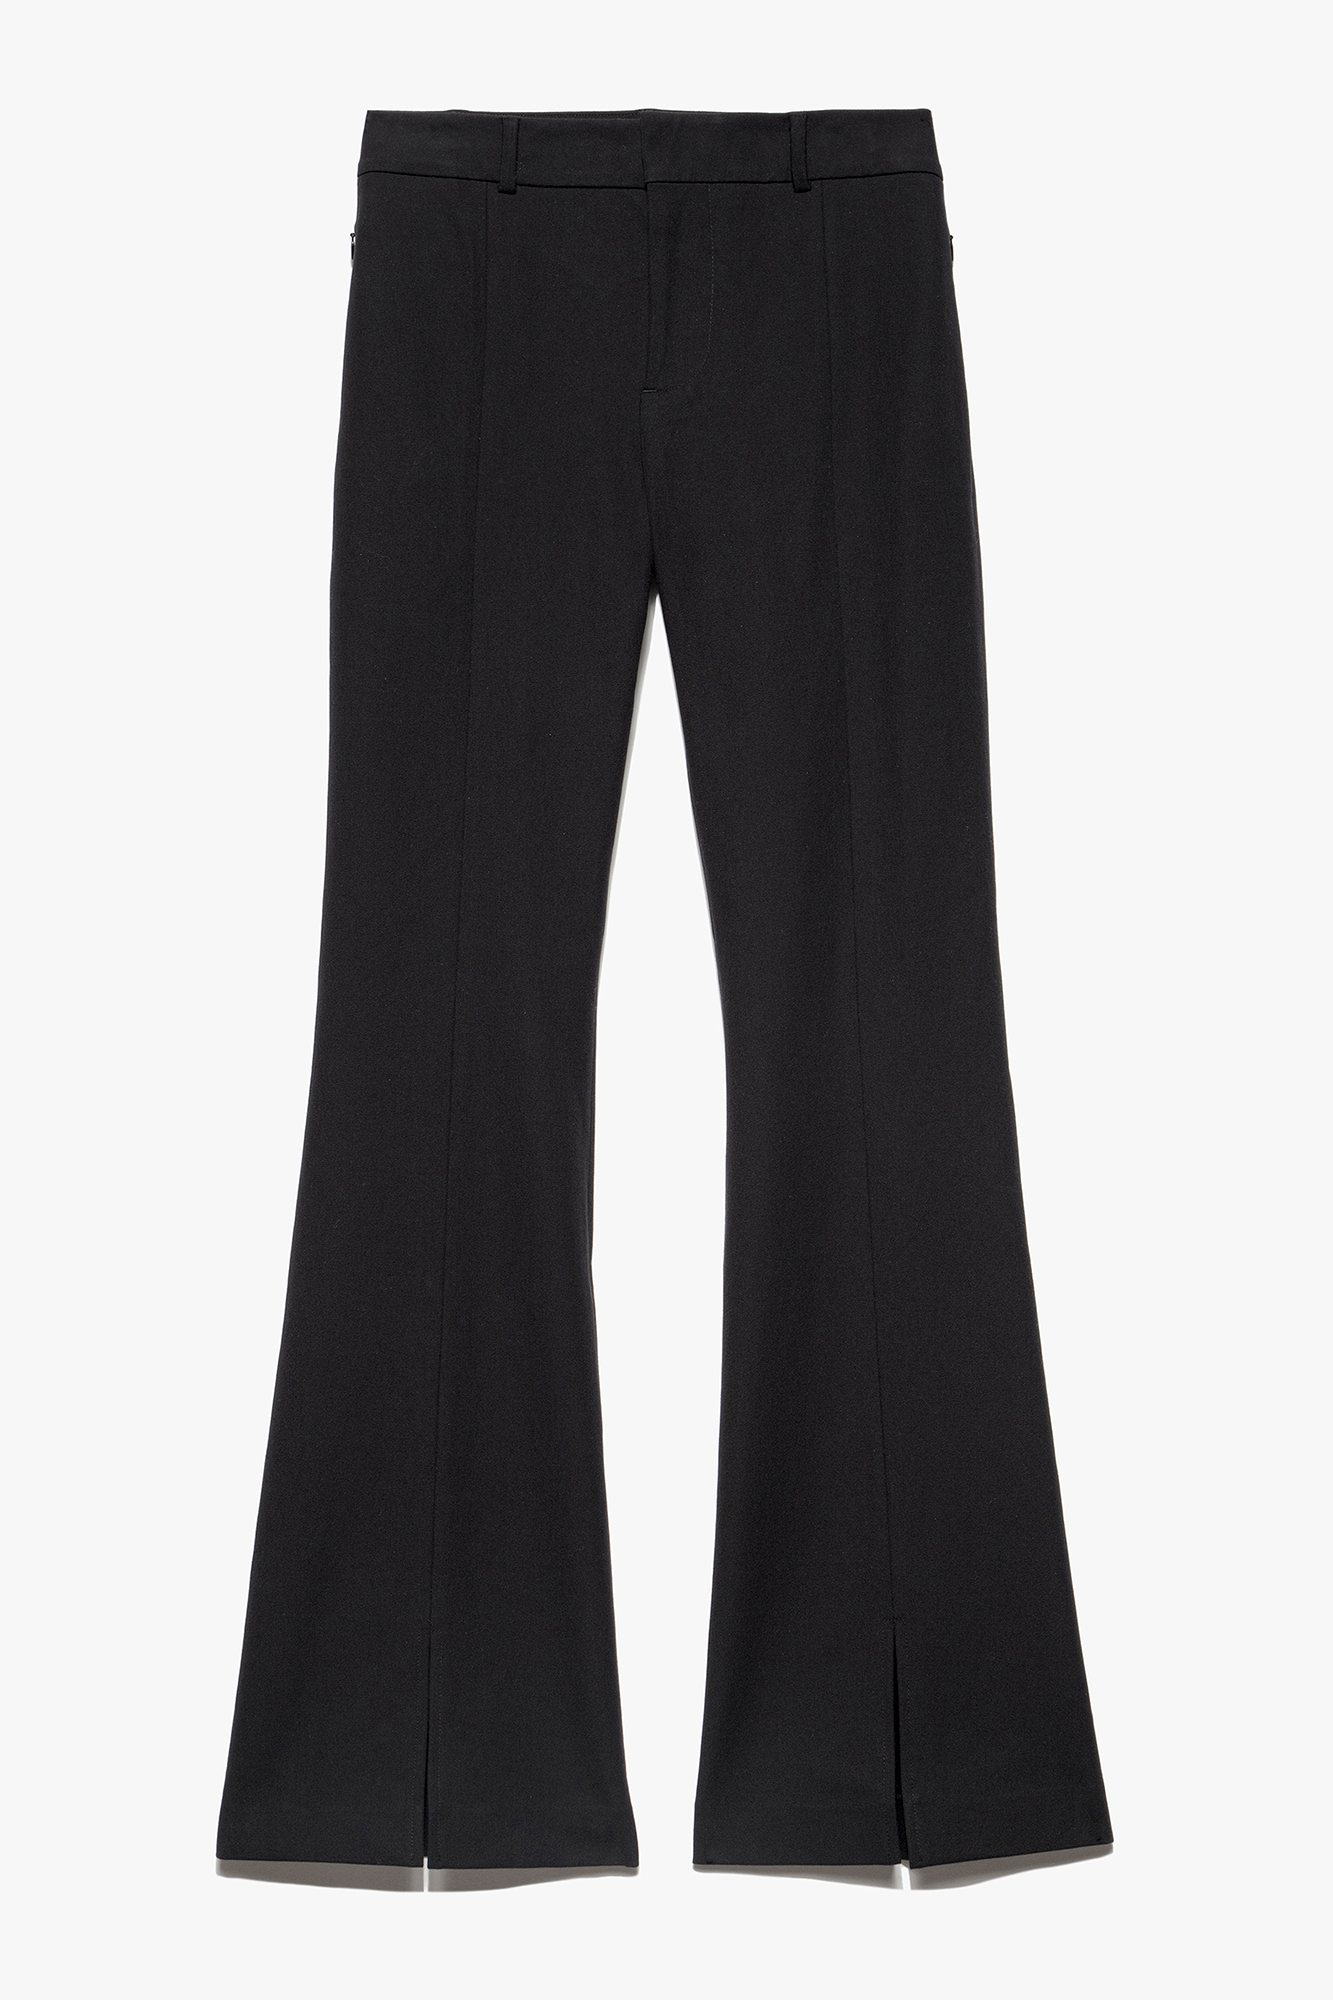 Flaunt your fashion savvy in the Le High Flare Split Front Trouser. This chic FRAME silhouette features a form-fitting silhouette through the leg with a generous flare from the knee for added panache.